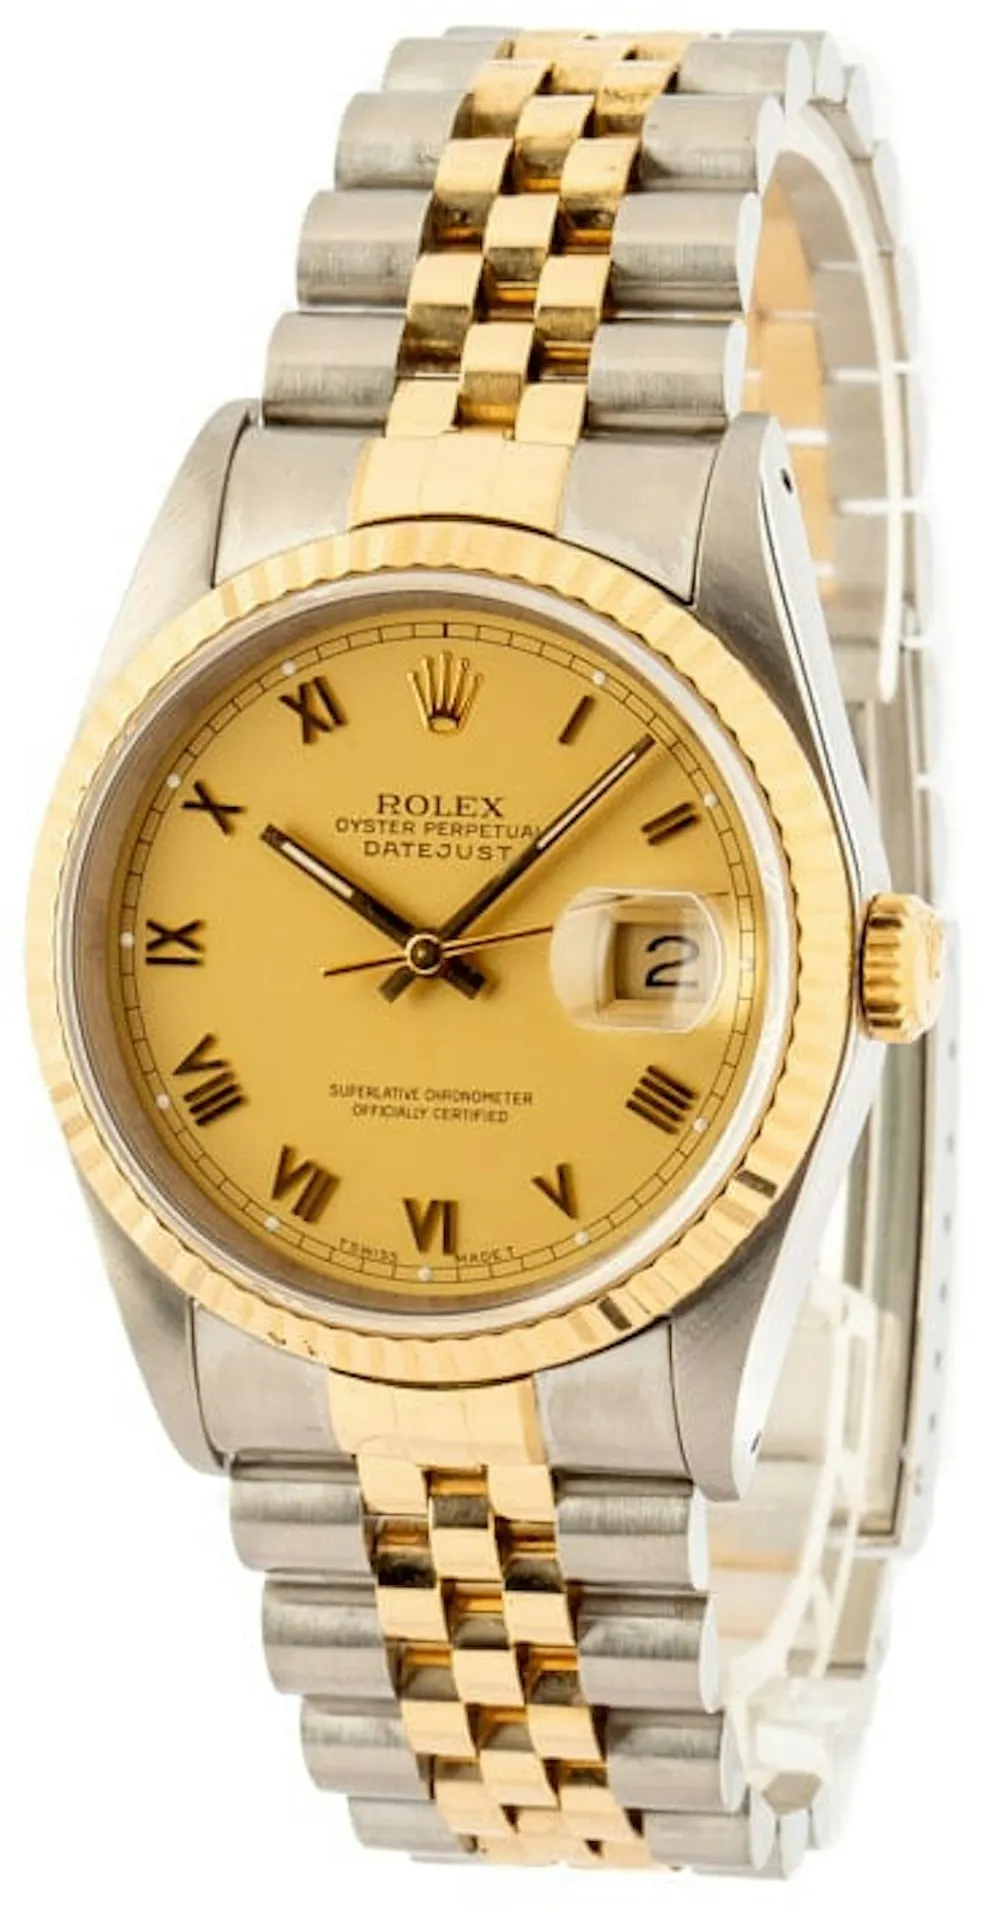 Rolex Datejust 16233 36mm Stainless steel Champagne 4